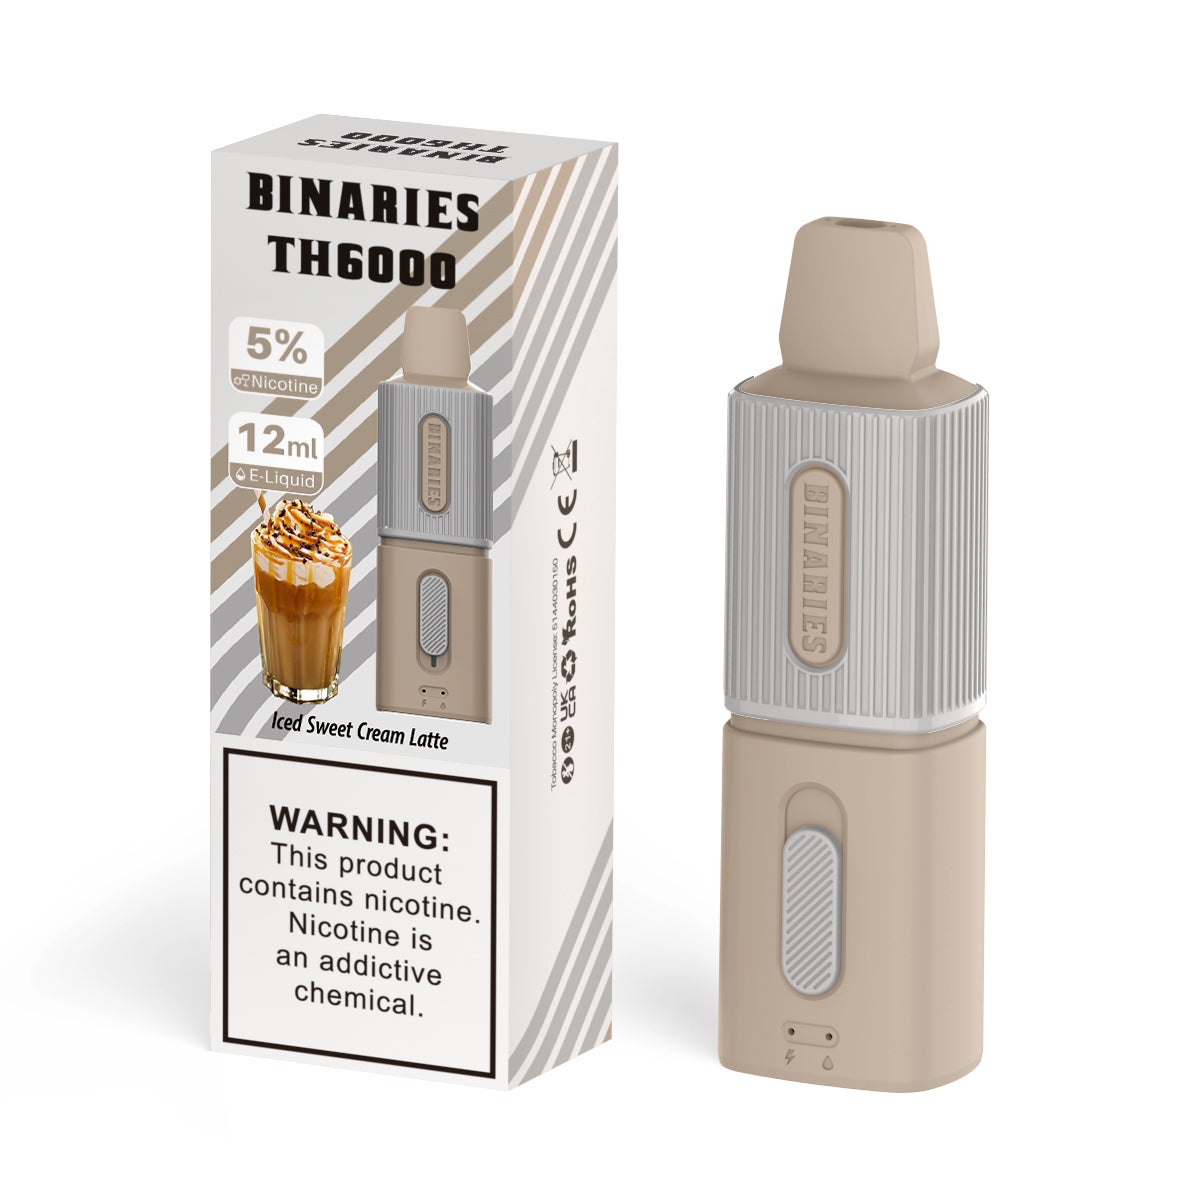 HorizonTech – Binaries Cabin Disposable TH | 6000 Puffs | 12mL | 50mg Iced Sweet Cream Latte	 with Packaging